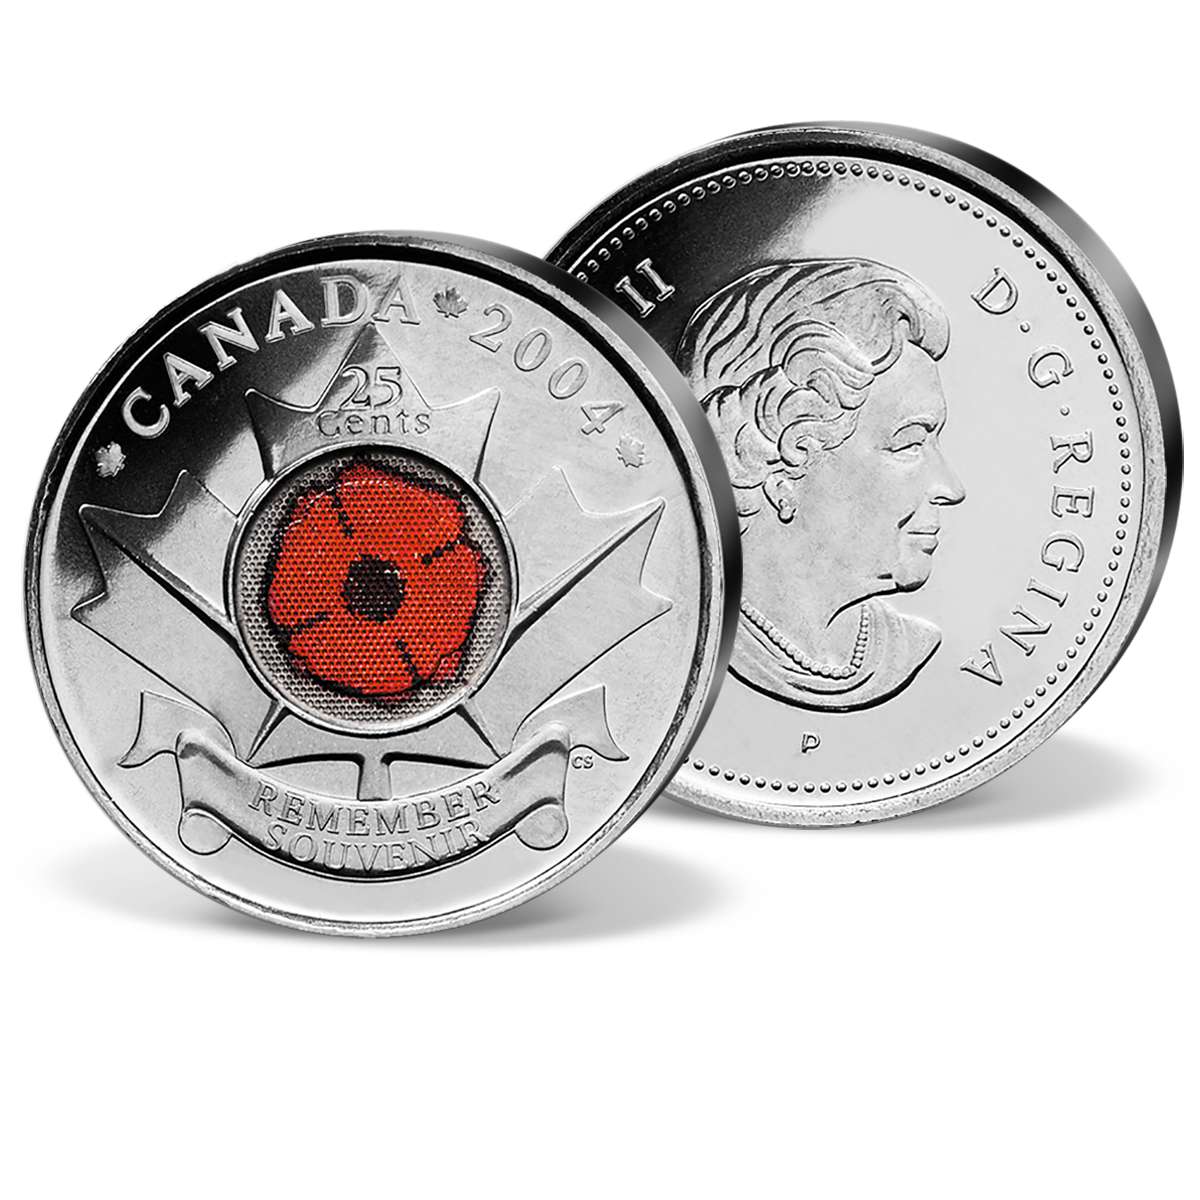 Double Color The Poppy Details about   1945-2010 Canada 25 ¢ Coin Uncirculated from Roll 